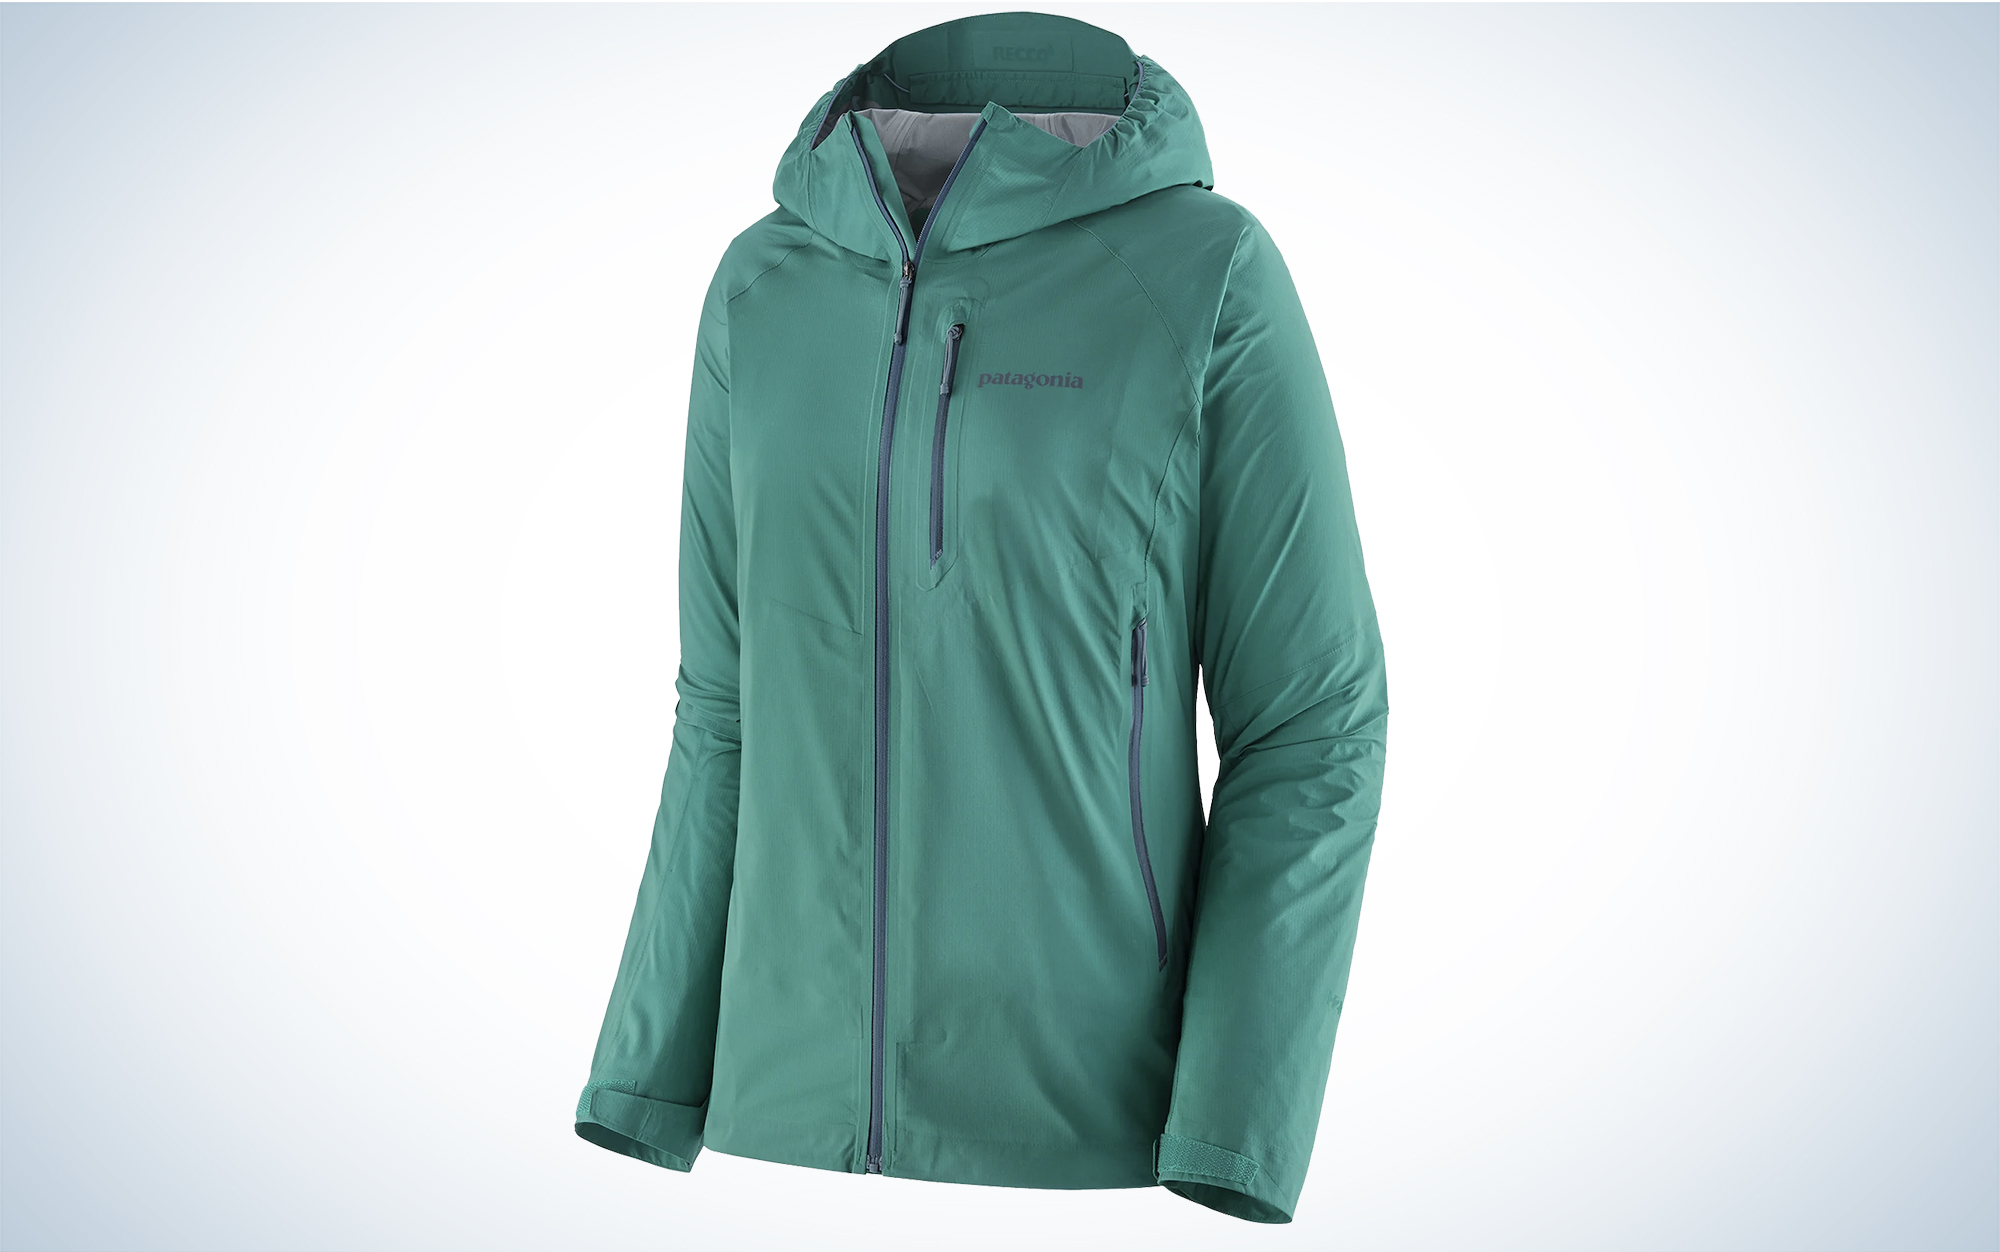 The Patagonia Storm10 is the most eco-friendly rain jacket.